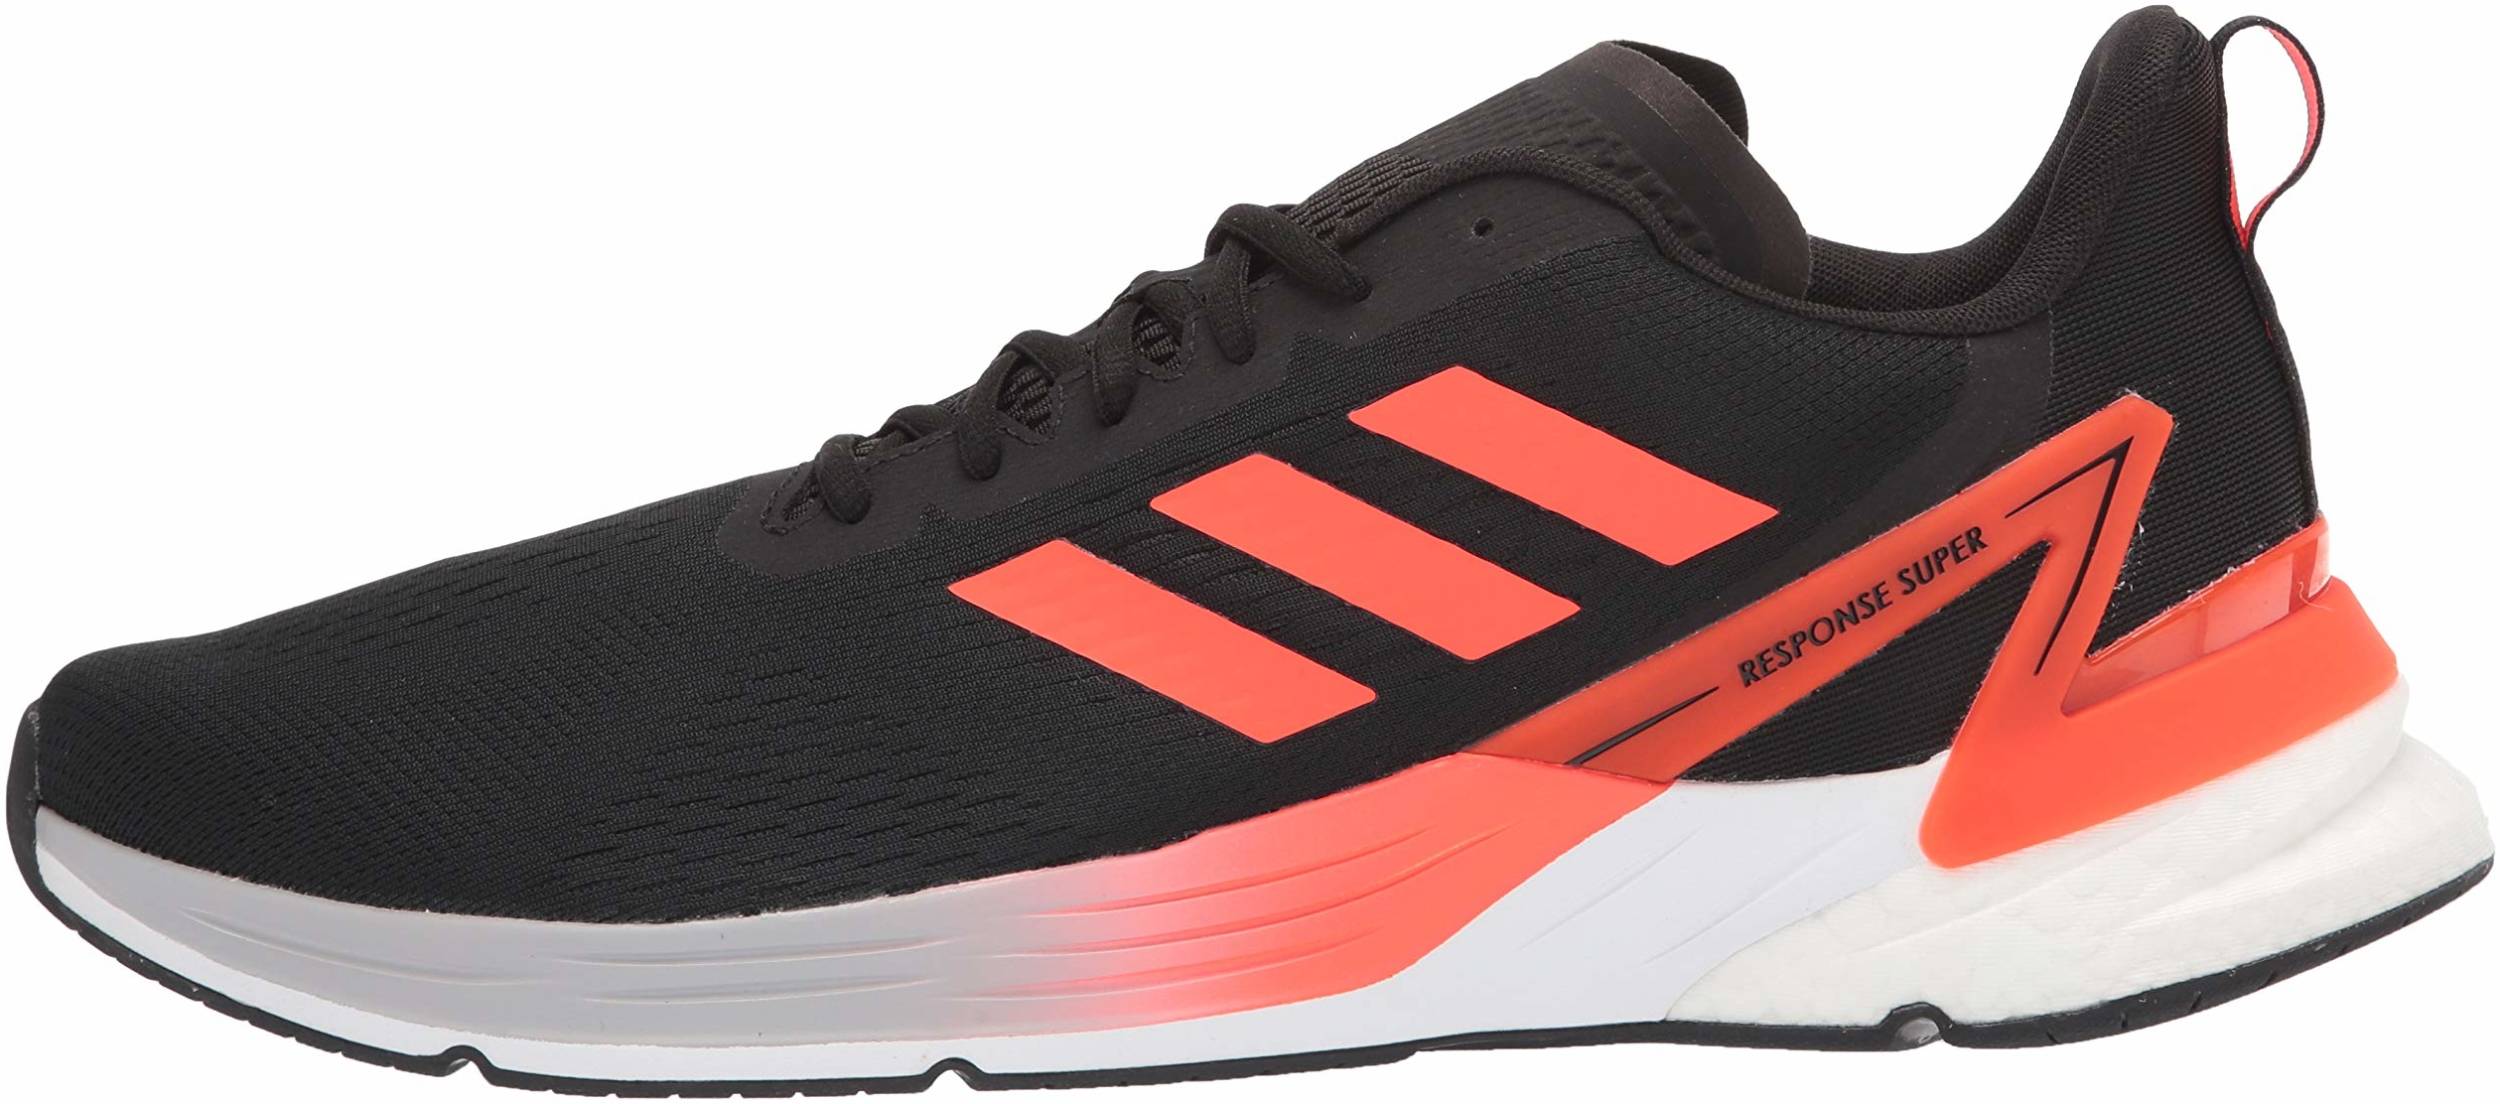 trader Morning exercises Stupid Adidas Response Super sneakers in 10+ colors (only $53) | RunRepeat